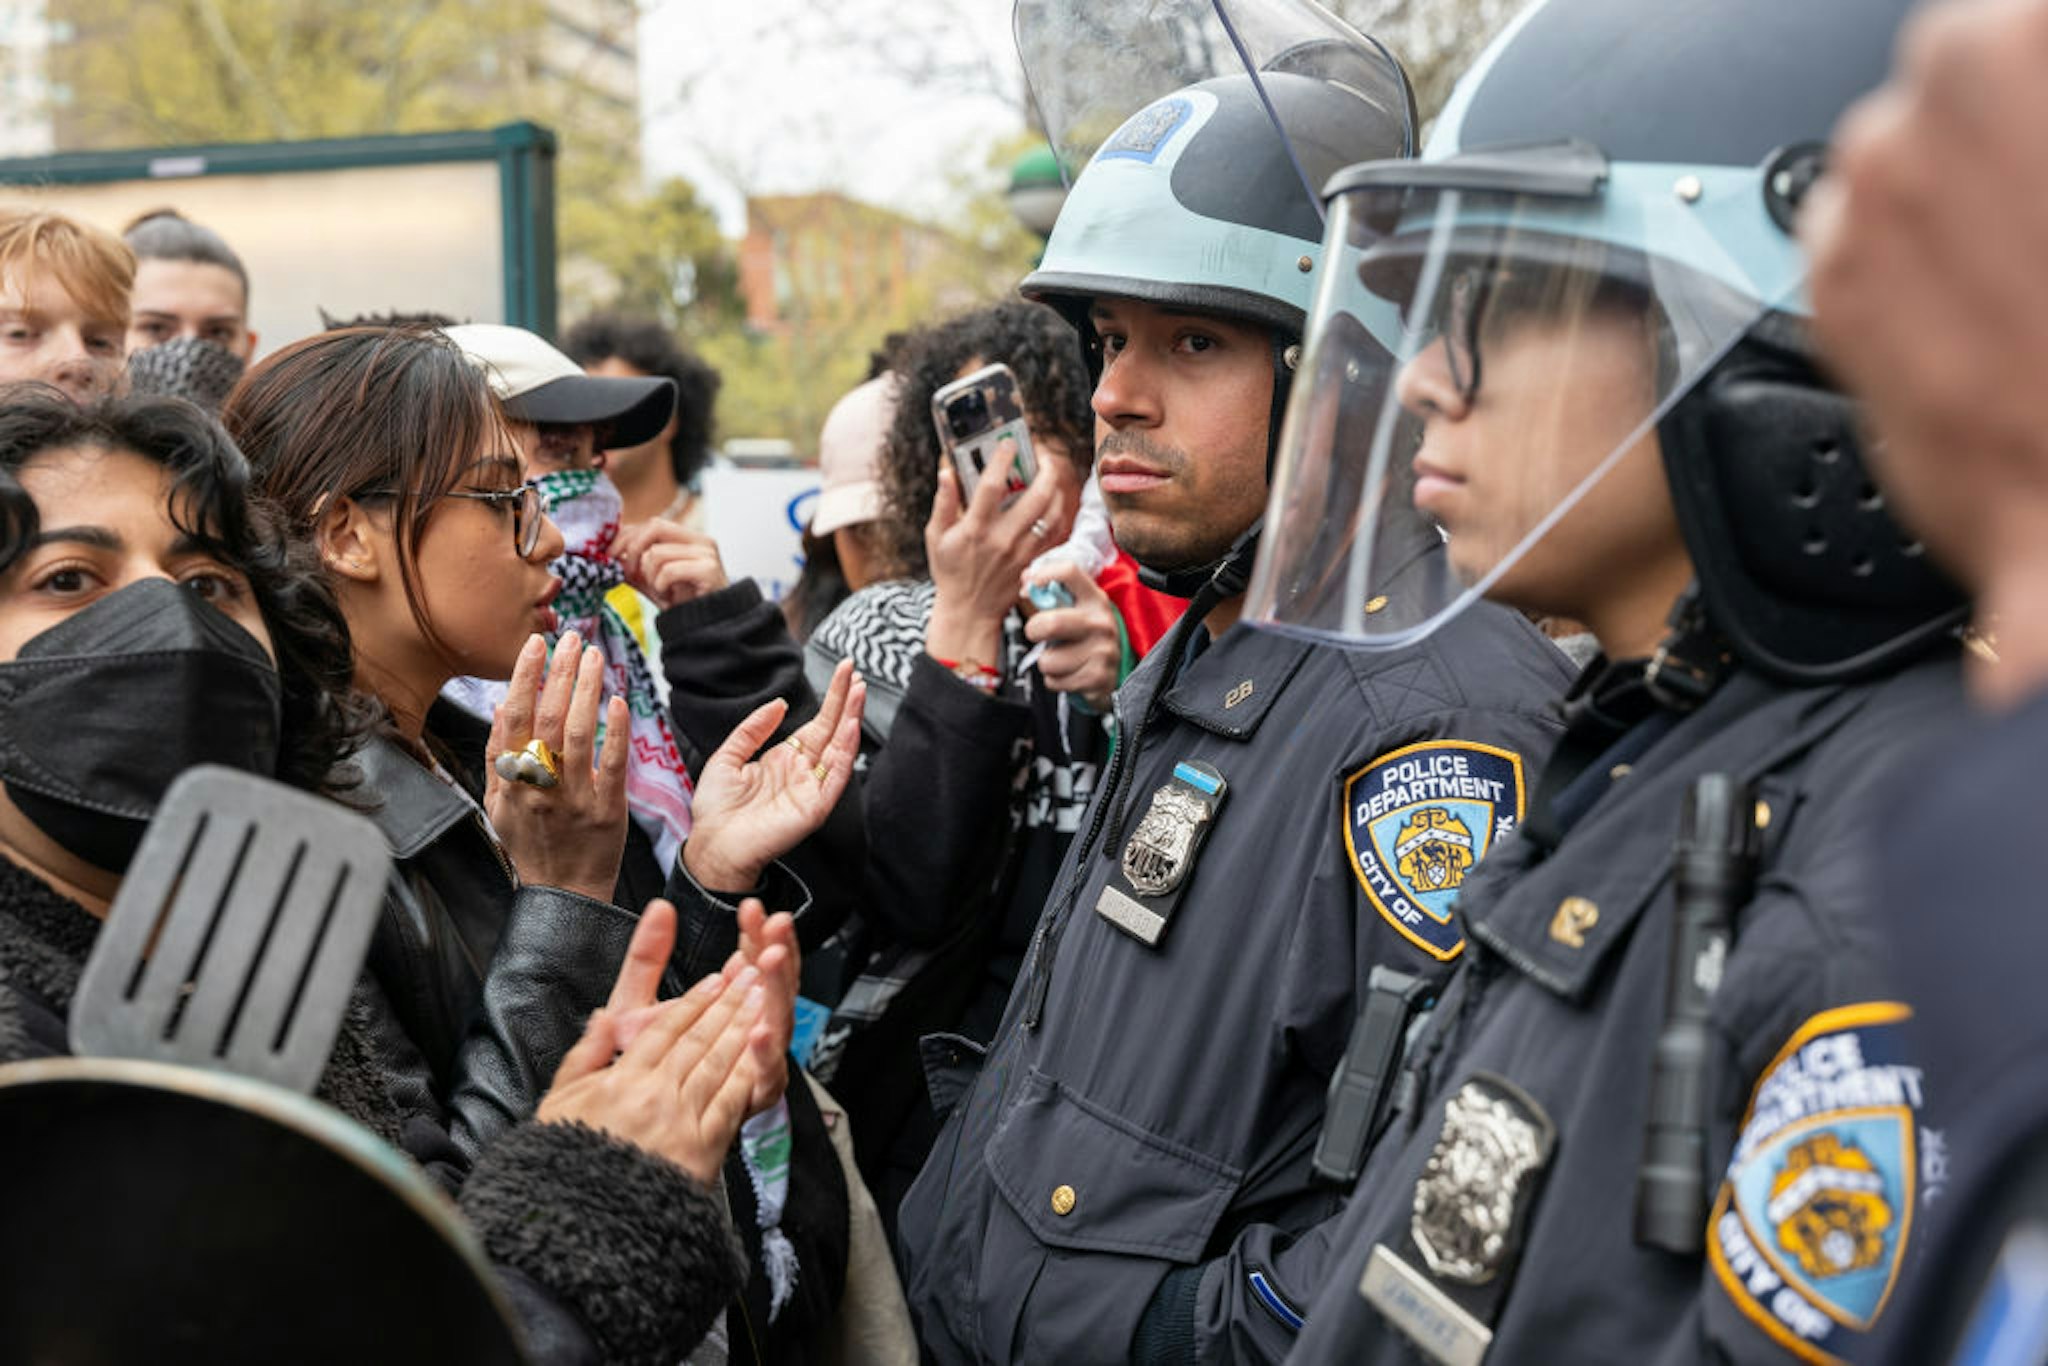 NEW YORK, NEW YORK - APRIL 18: Students and pro-Palestinian activists face police as they gather outside of Columbia University to protest the university's stance on Israel on April 18, 2024 in New York City. The protests come after numerous students were arrested earlier in the day after setting up tents on the university lawn in support of Gaza. (Photo by Spencer Platt/Getty Images)